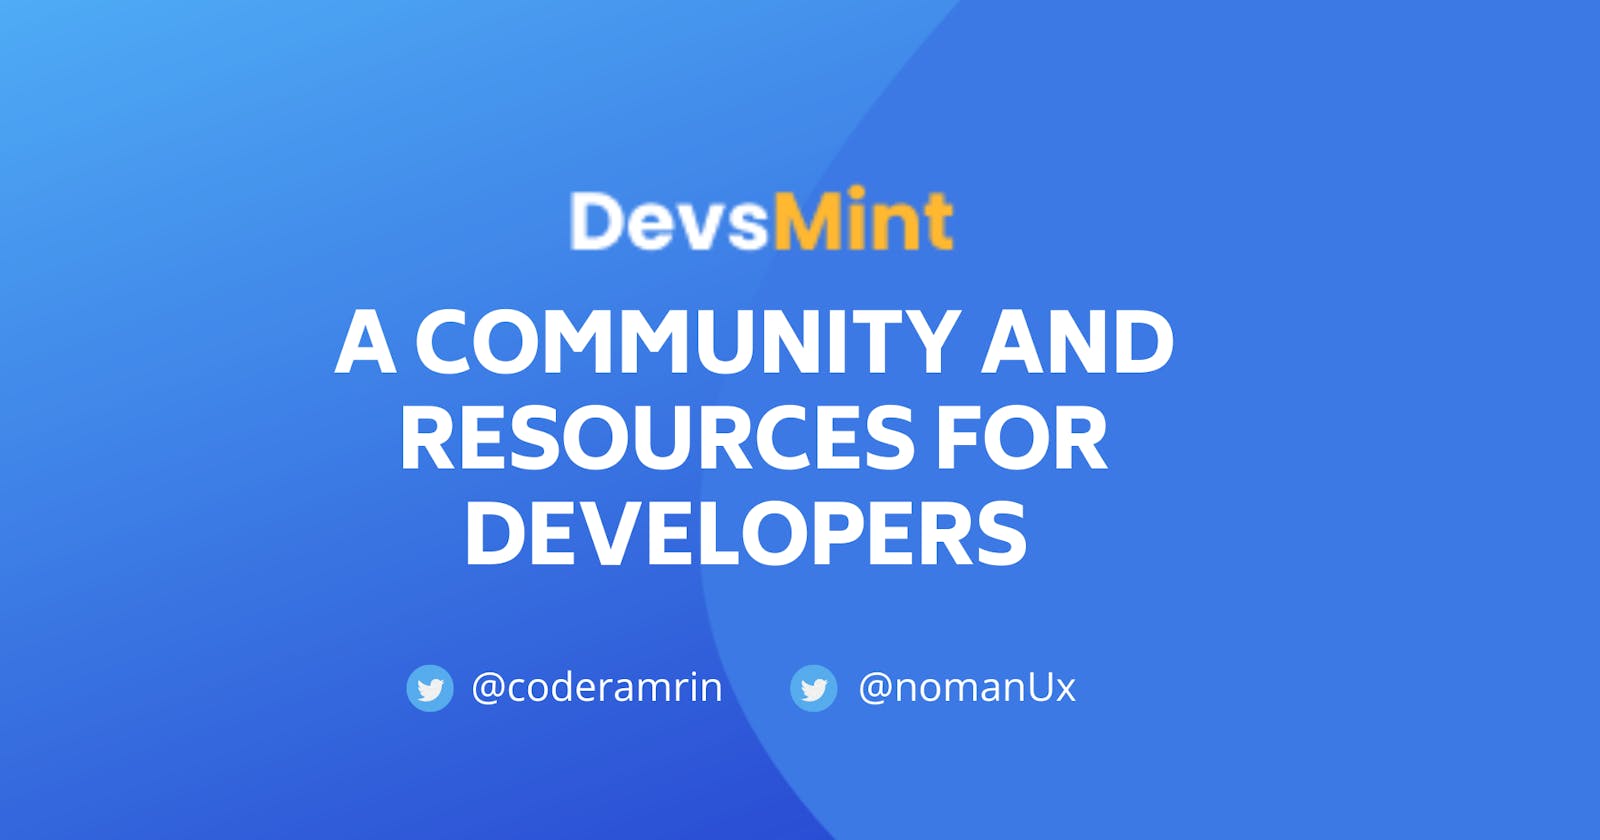 DevsMint A community and resources for developers to learn, improve and grow